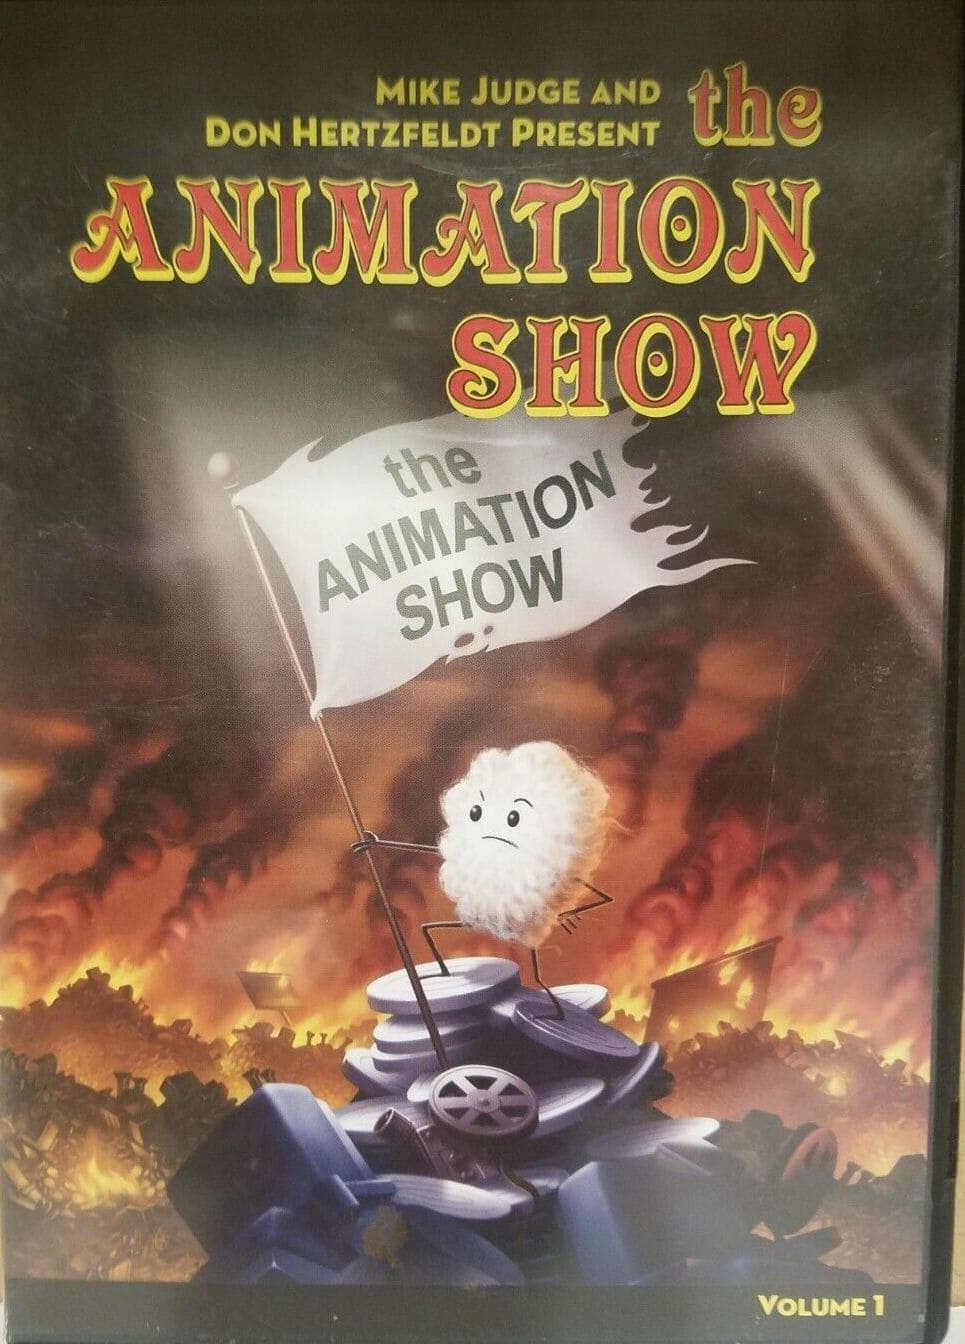 The Animation Show, Volume 1